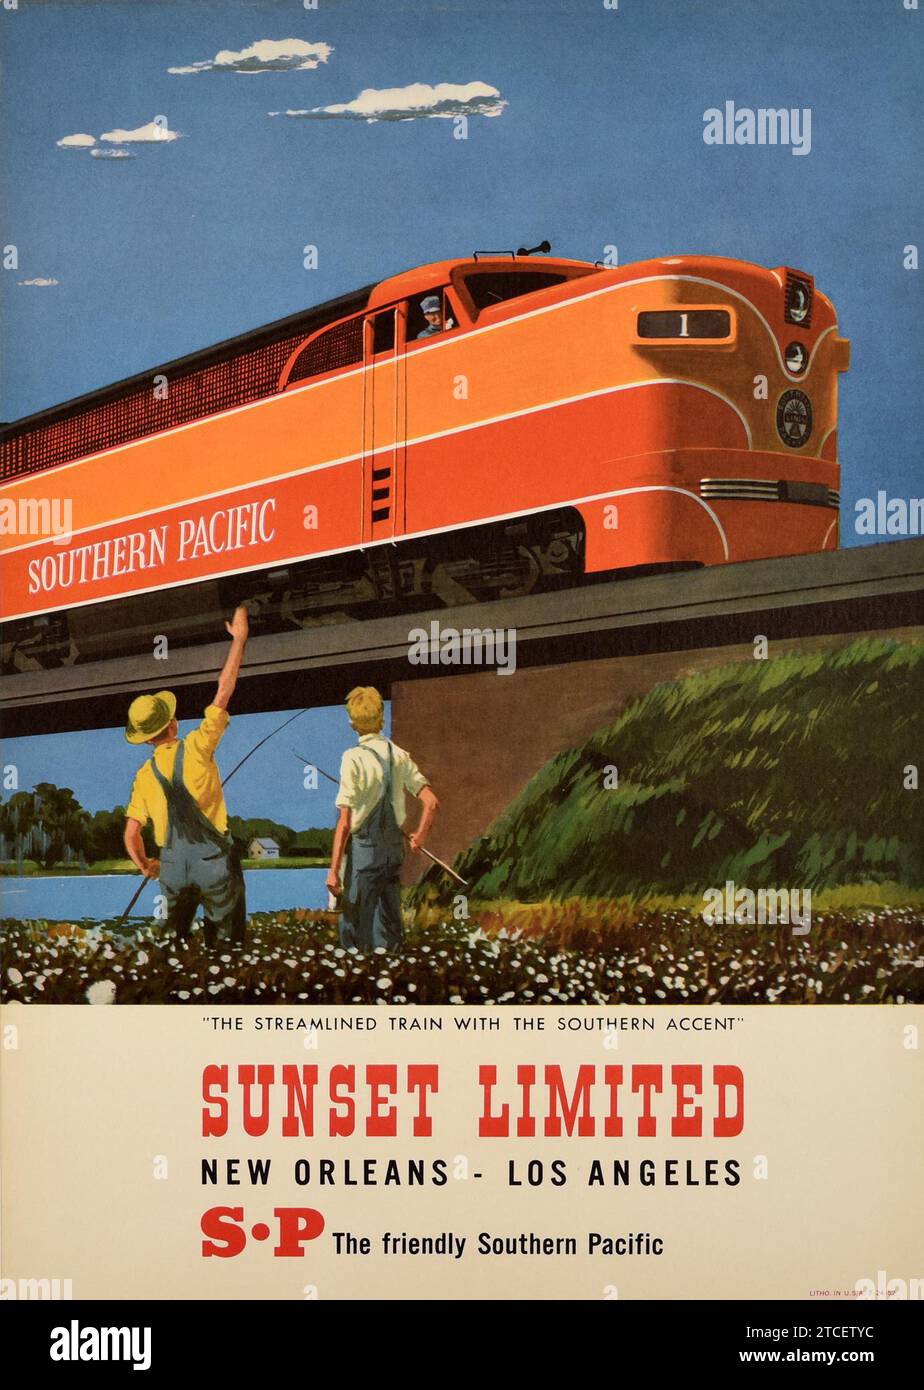 Vintage Travel Poster - Sunset Limited Railroad Southern Pacific Railway, New Orleans-Los Angeles - 1952 Stock Photo